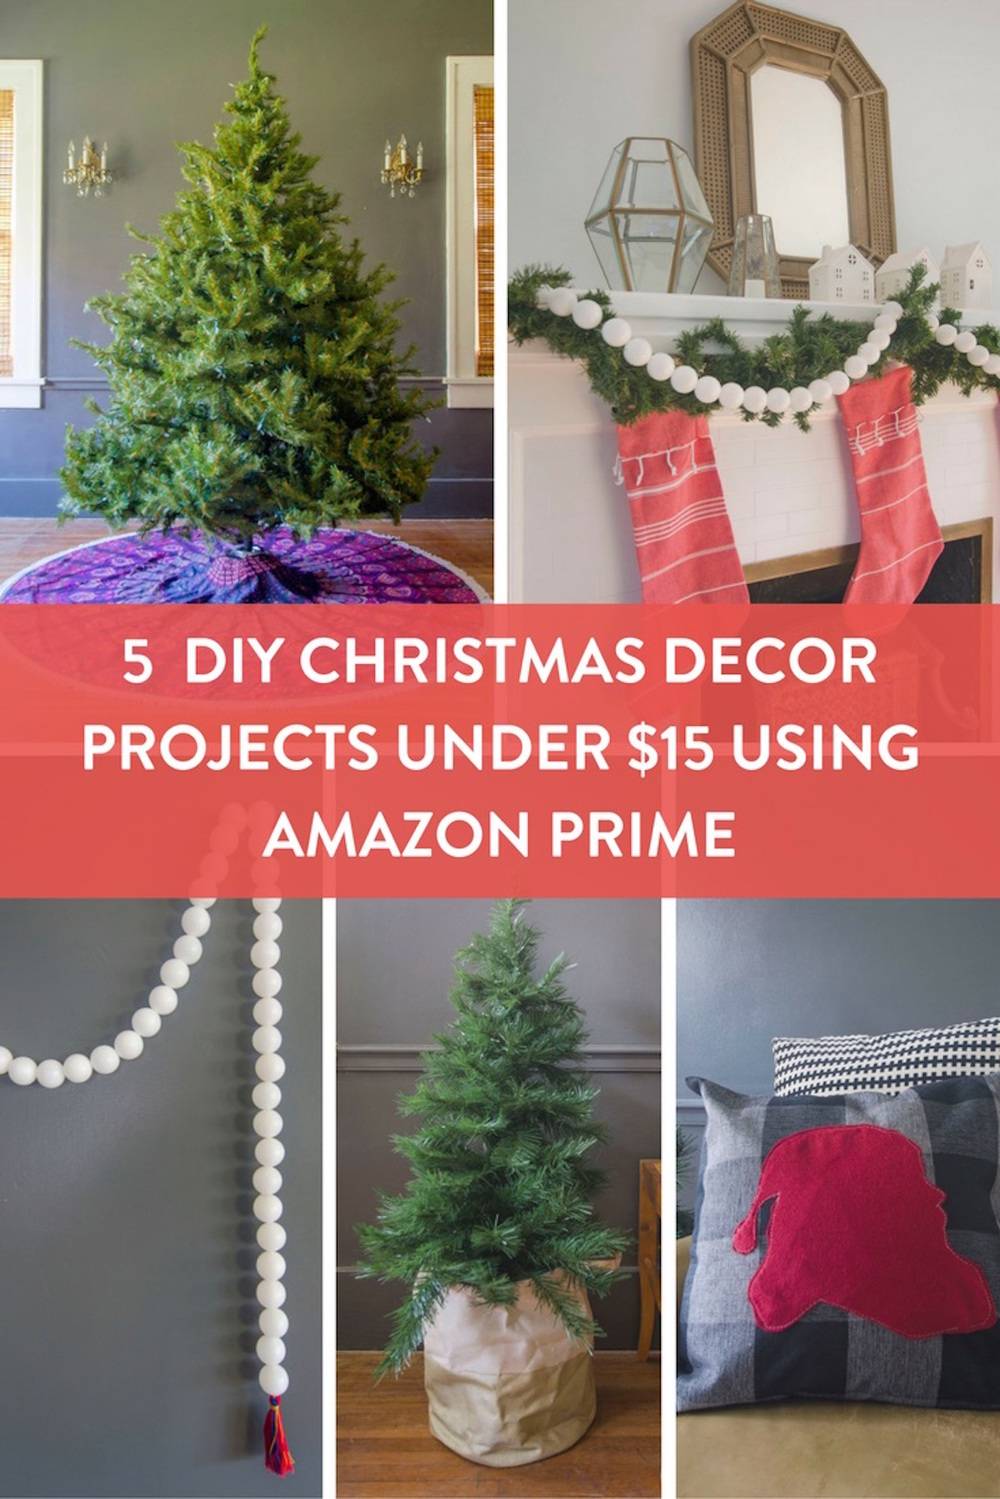 5 Decor Projects Under $15 using Amazon Prime